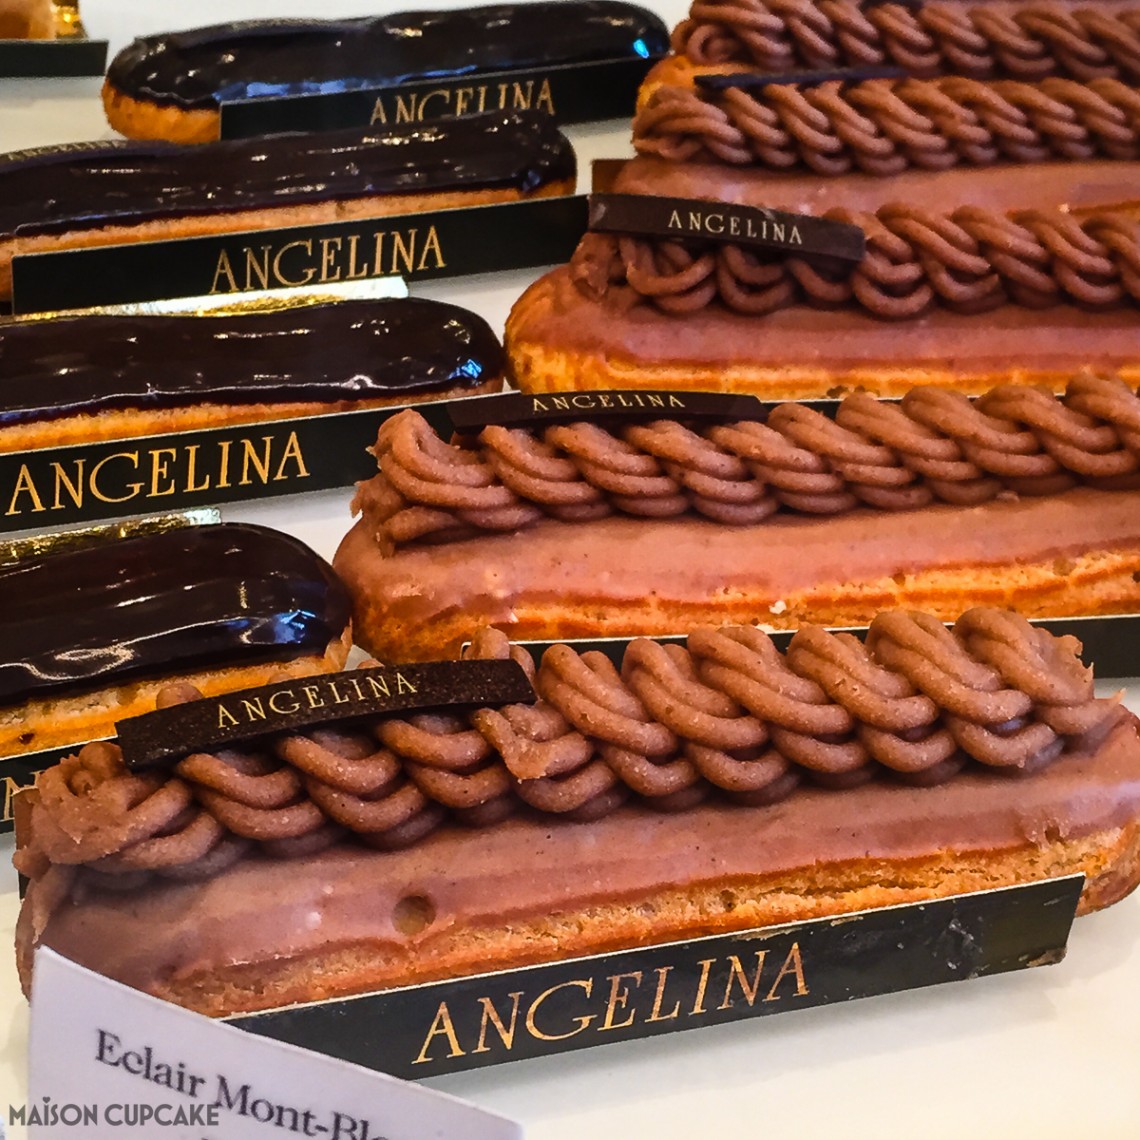 Chestnut eclairs from Angelique French Patisserie Paris